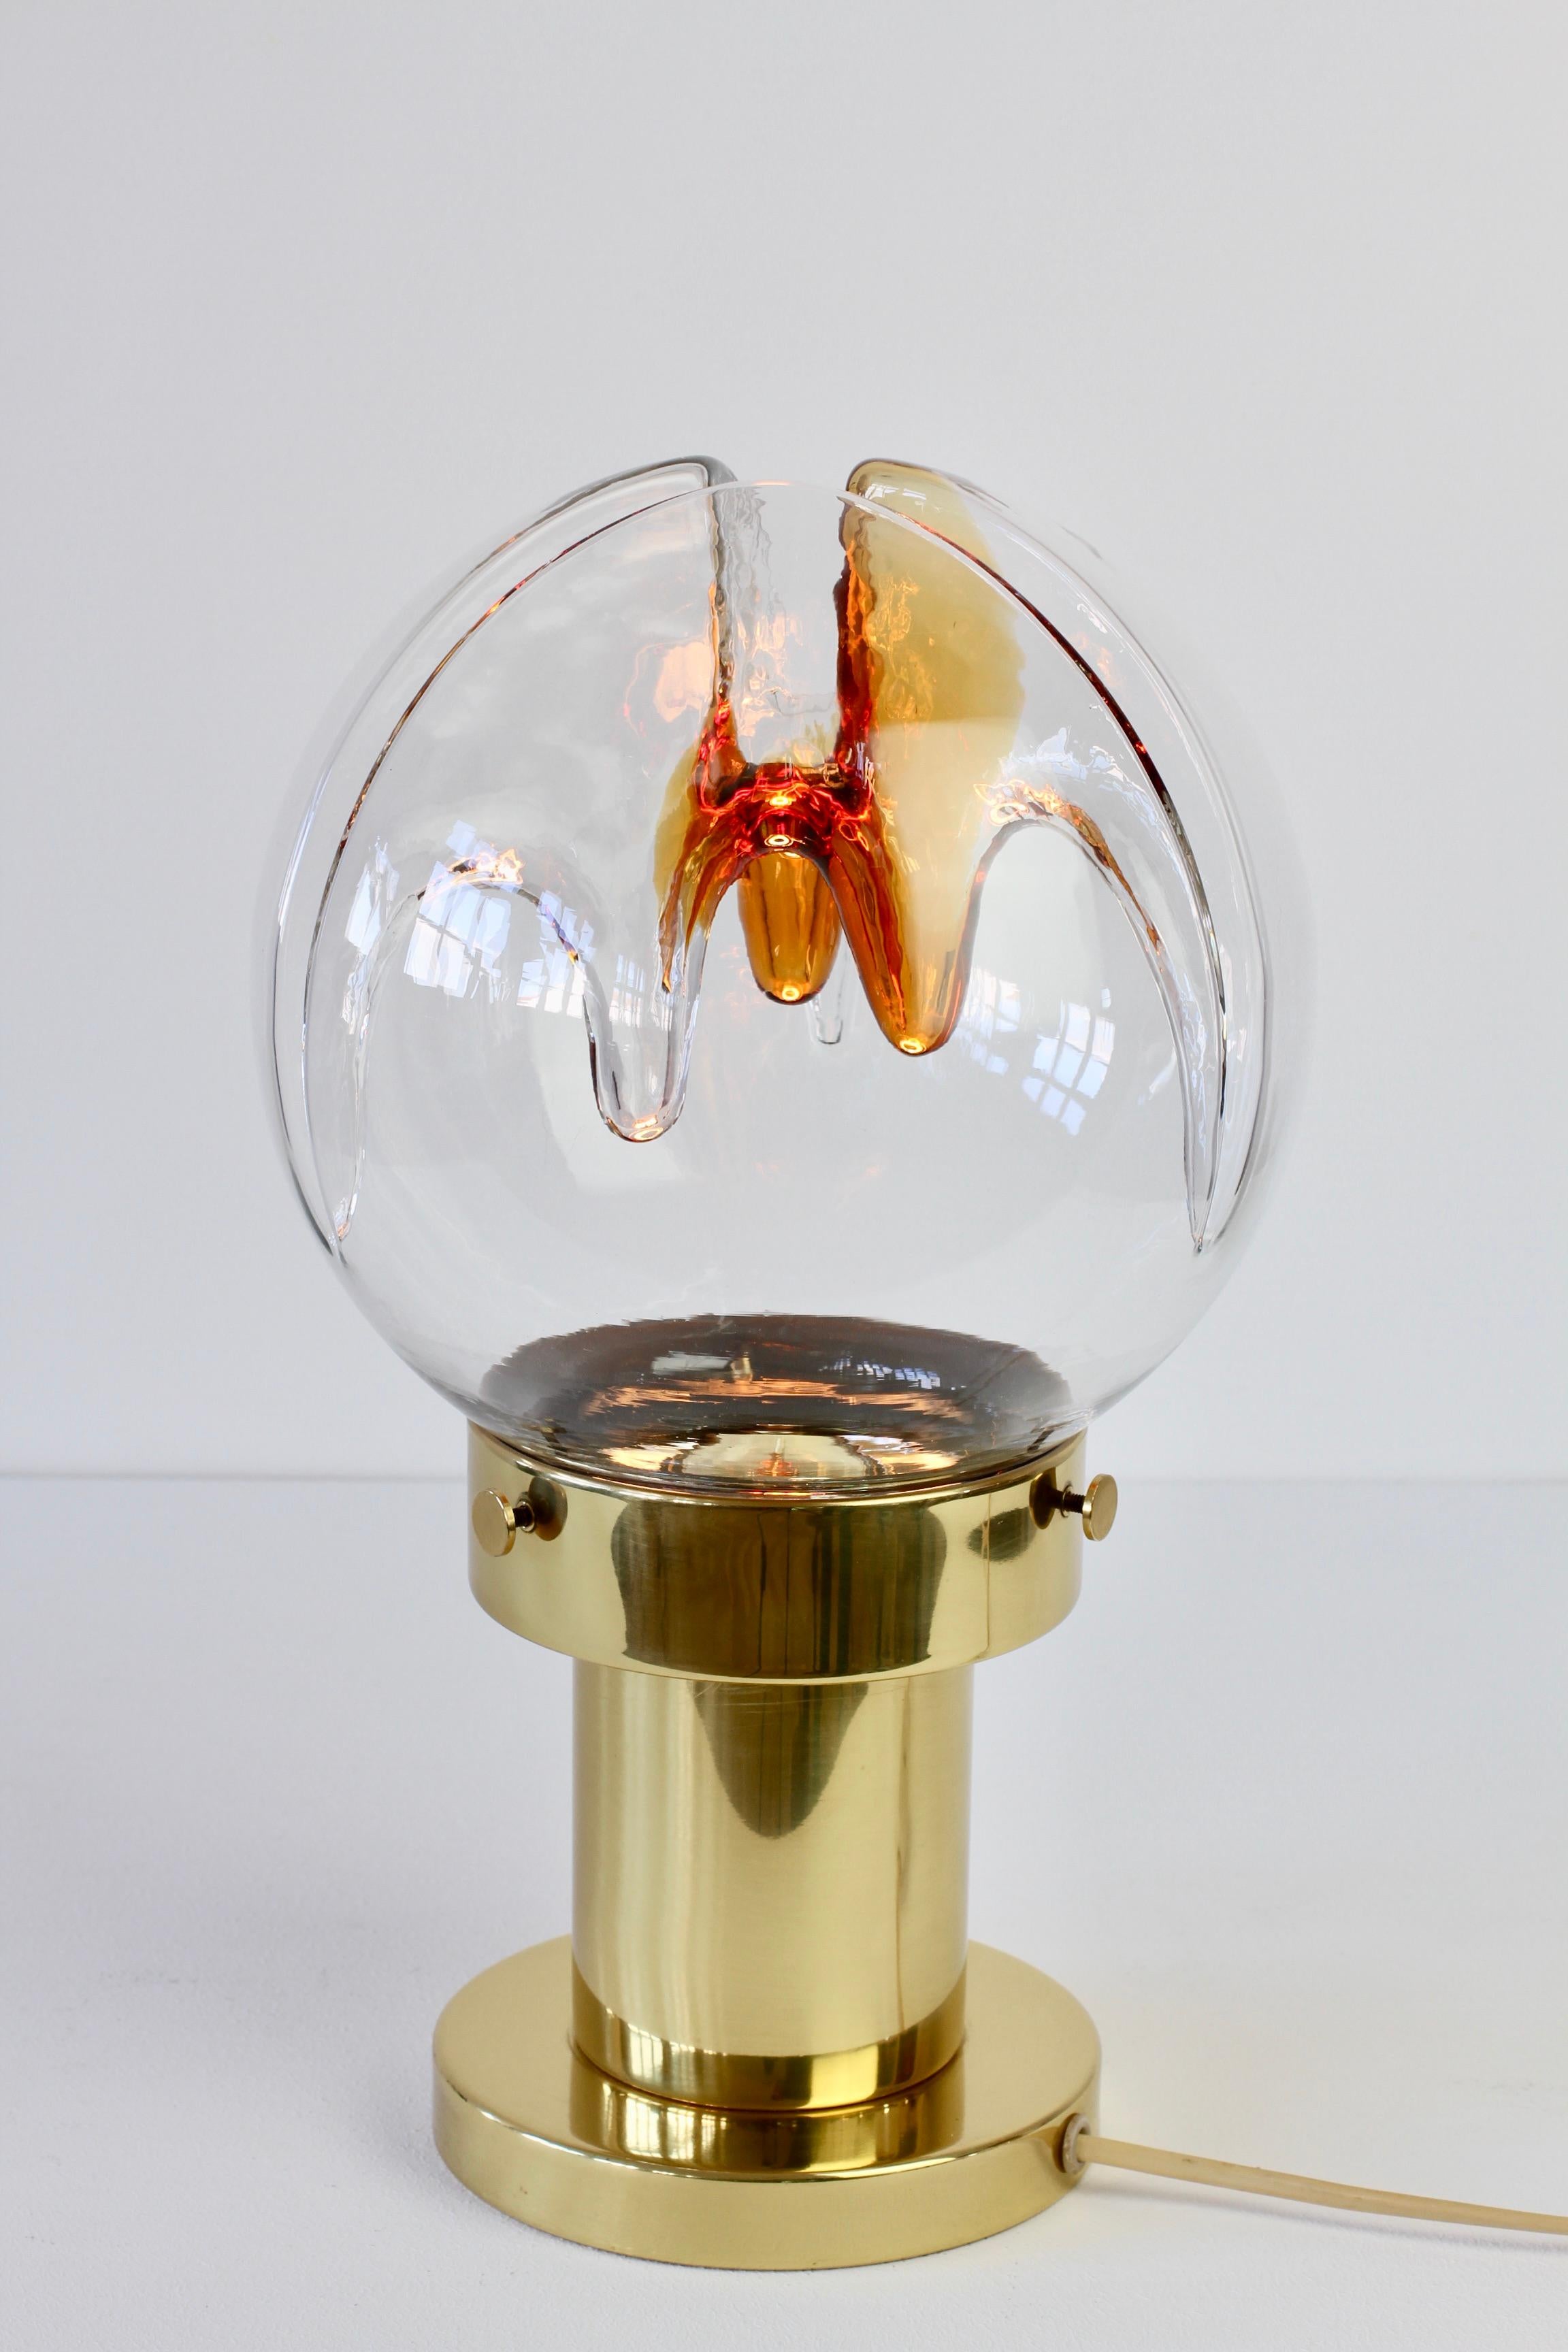 Midcentury vintage textured glass table lamp by Kaiser Leuchten with textured coloured Murano glass shade attributed to Mazzega circa 1970s . A fantastic design featuring wonderfully textured biomorphic clear and orange / amber colored glass shade.